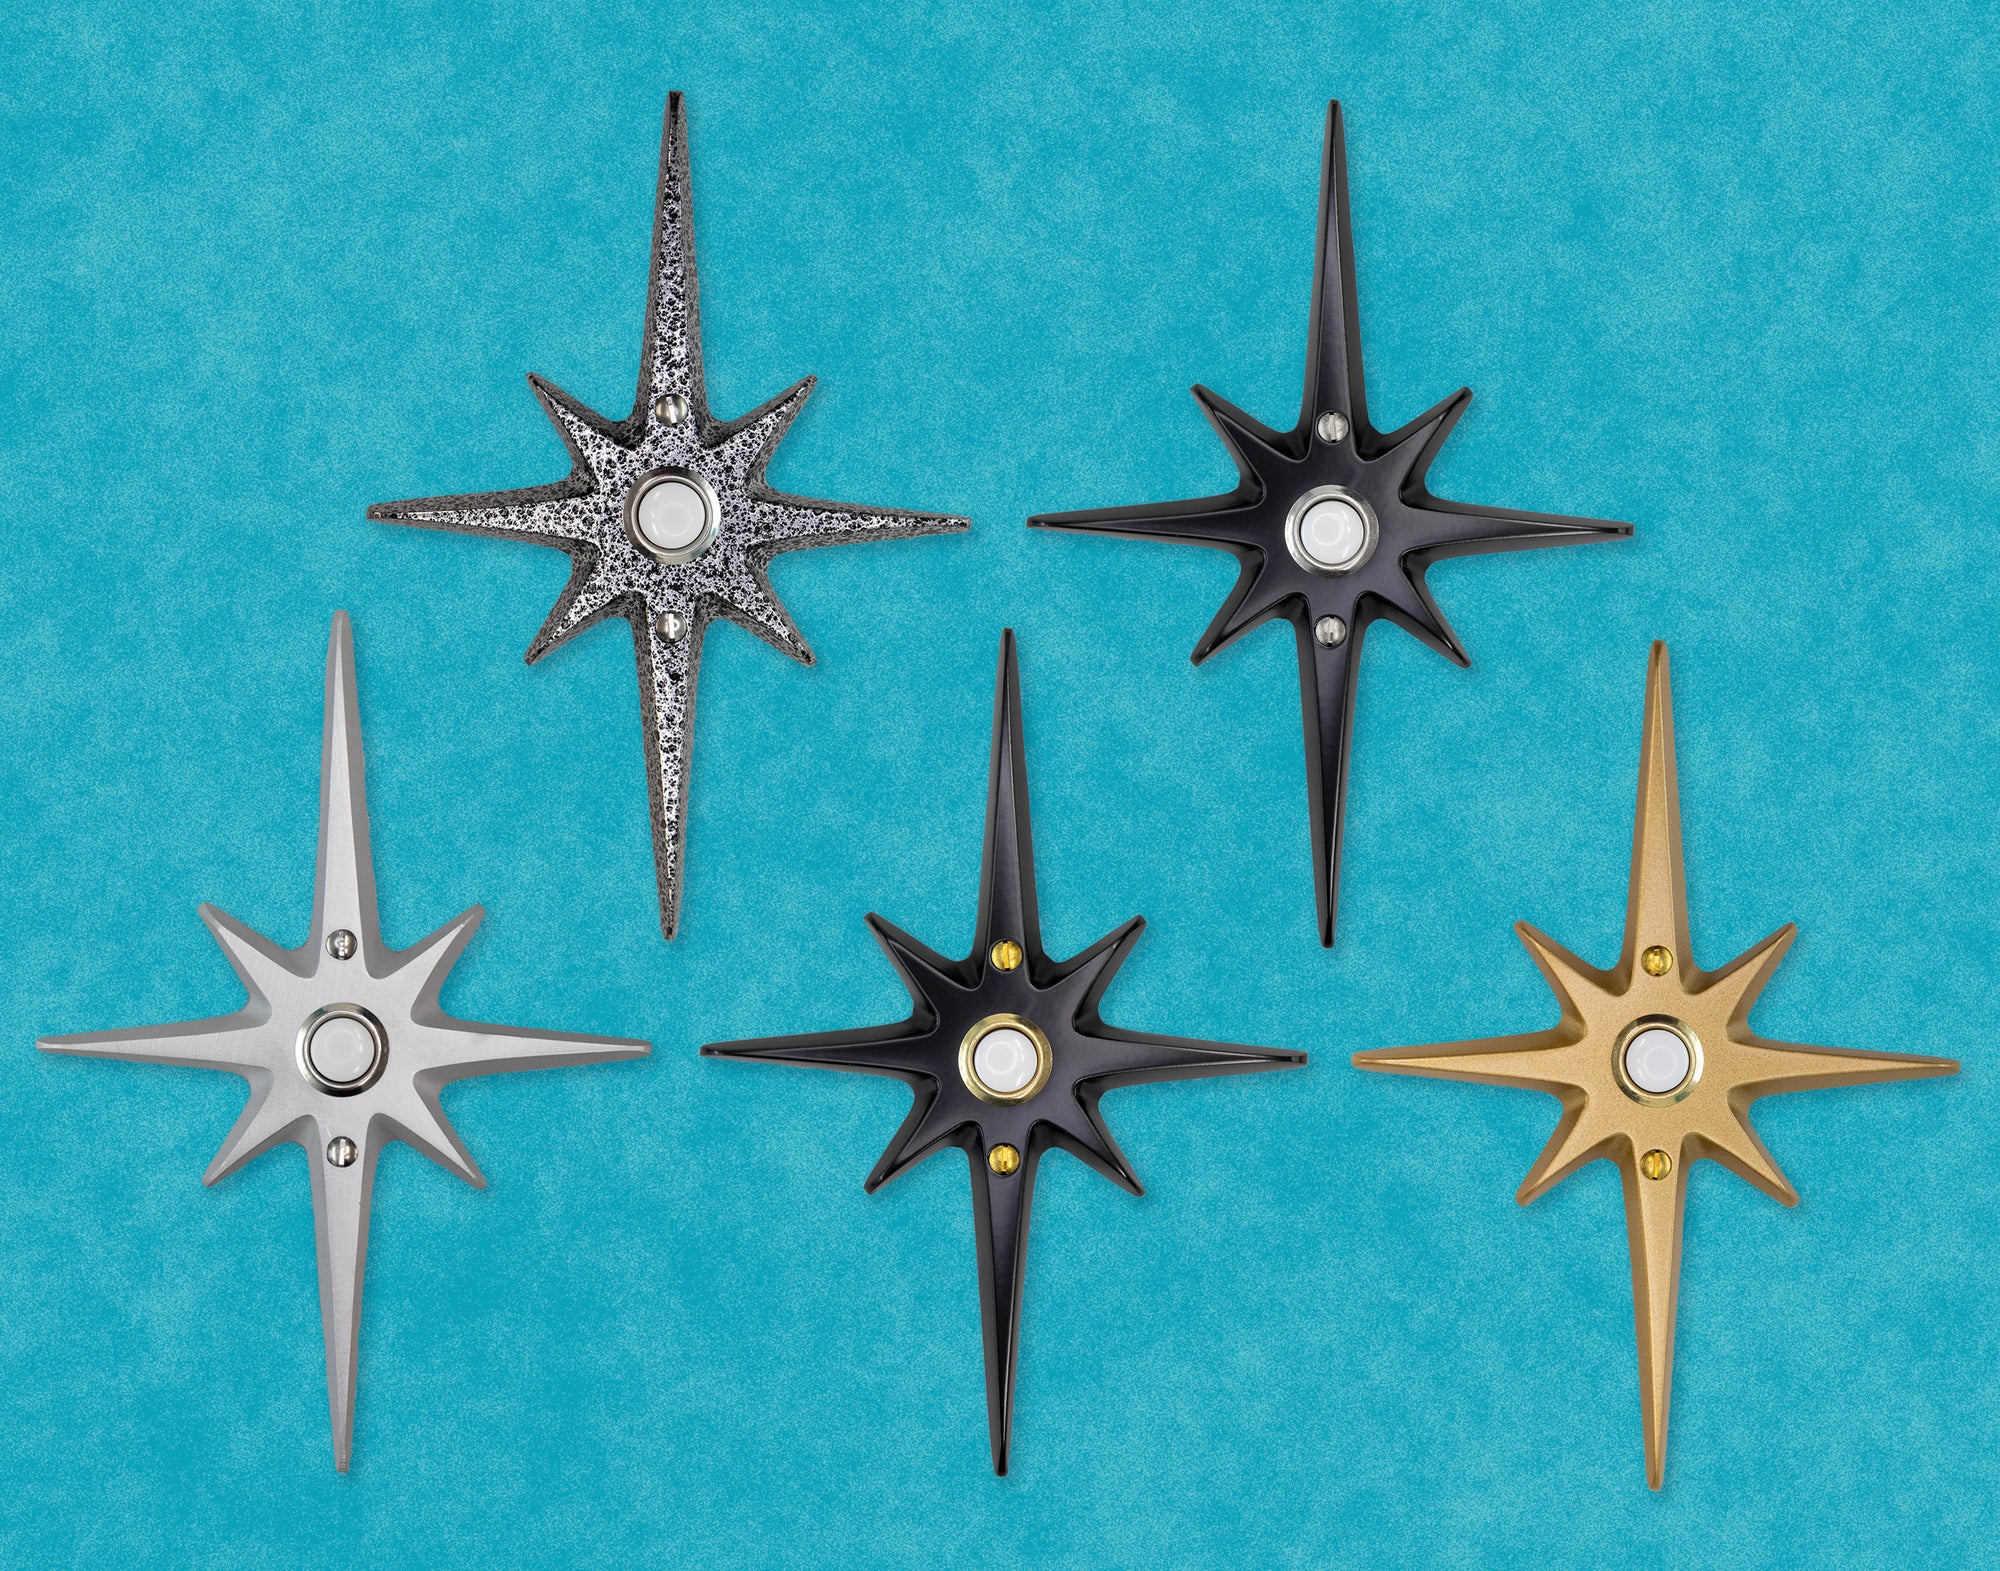 Collage of all five variations of the medium starburst doorbell. They are cast aluminum, one variation is bare natural aluminum, while the rest have a colored powder coating.